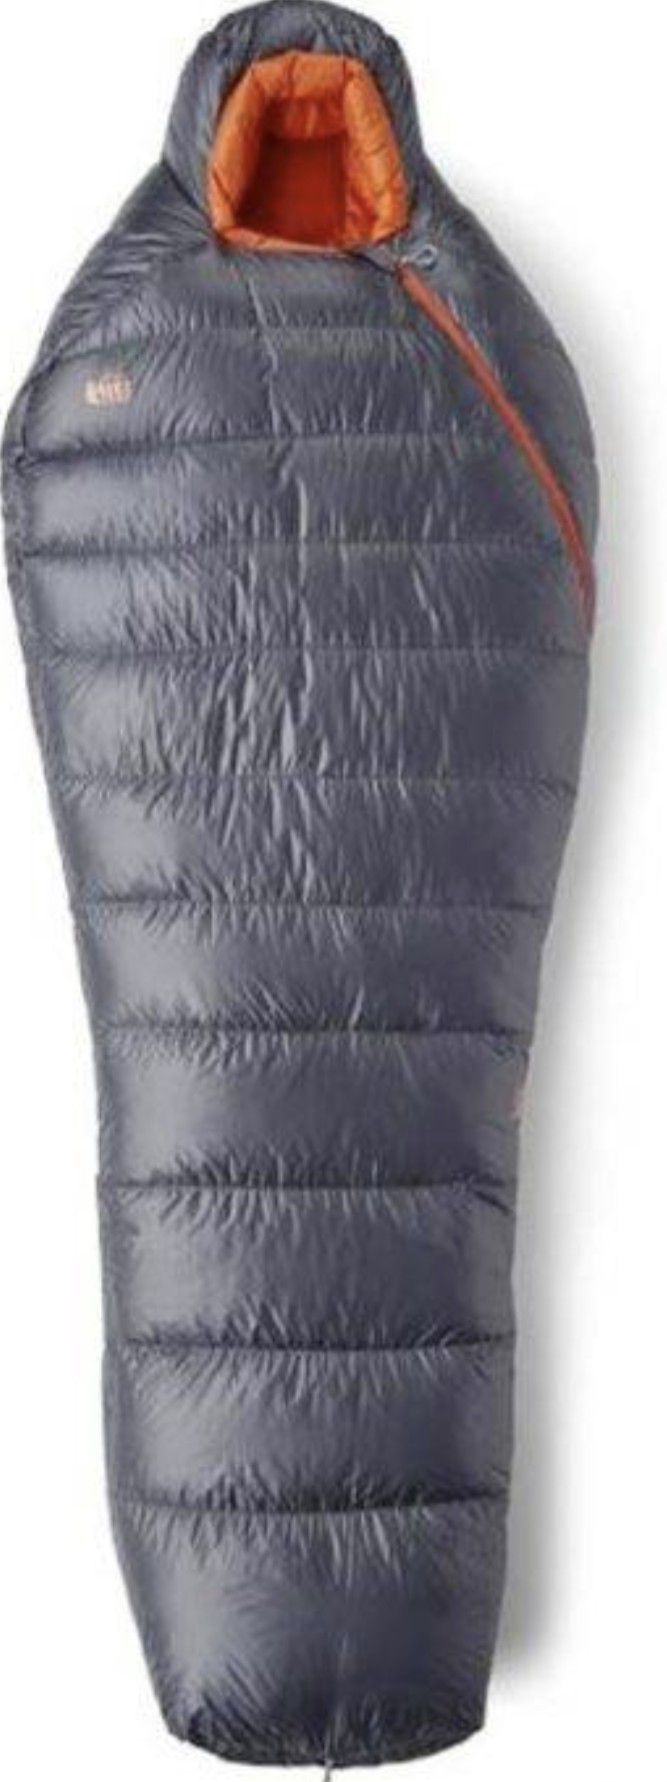 As New 6' REI Magma 30f Ultralight 1.3lbs Goose Down Sleeping Bag Quilt 850fp Men's Women's Western Mountaineering Feathered Friends Nemo Backpacking 